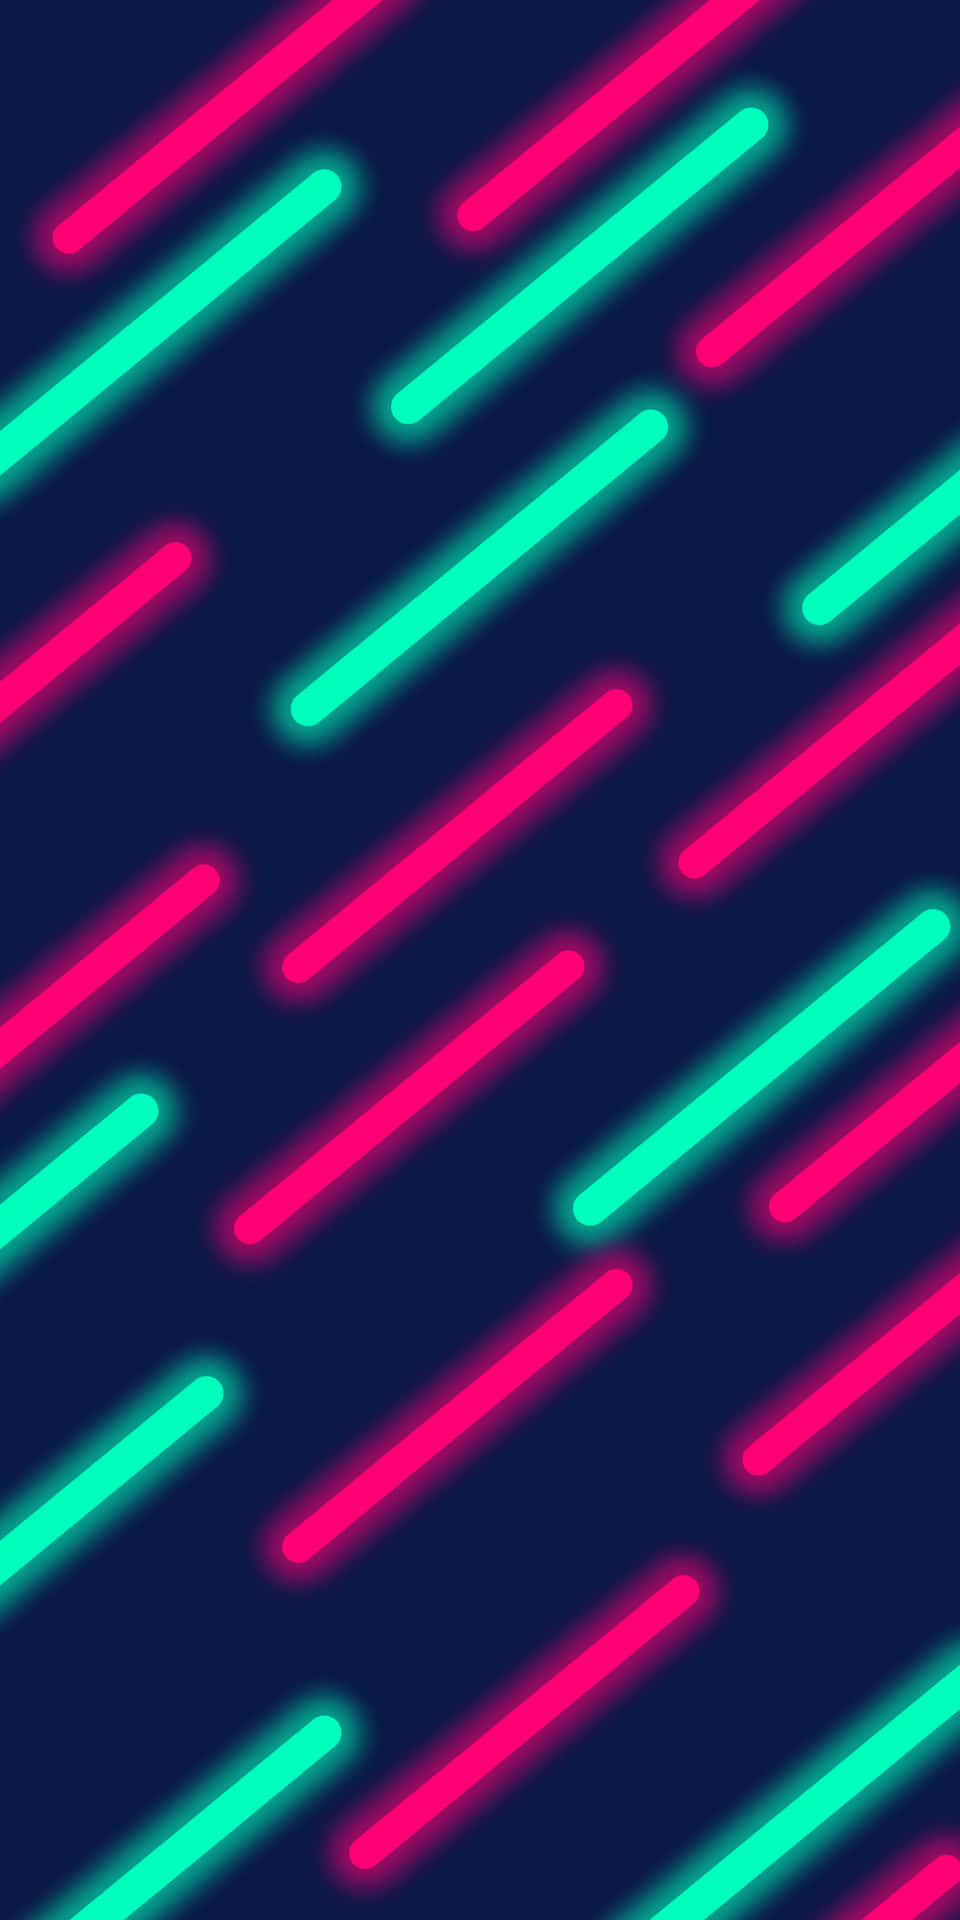 Neon Fun, A Colorful Pop of Green and Purple Wallpaper